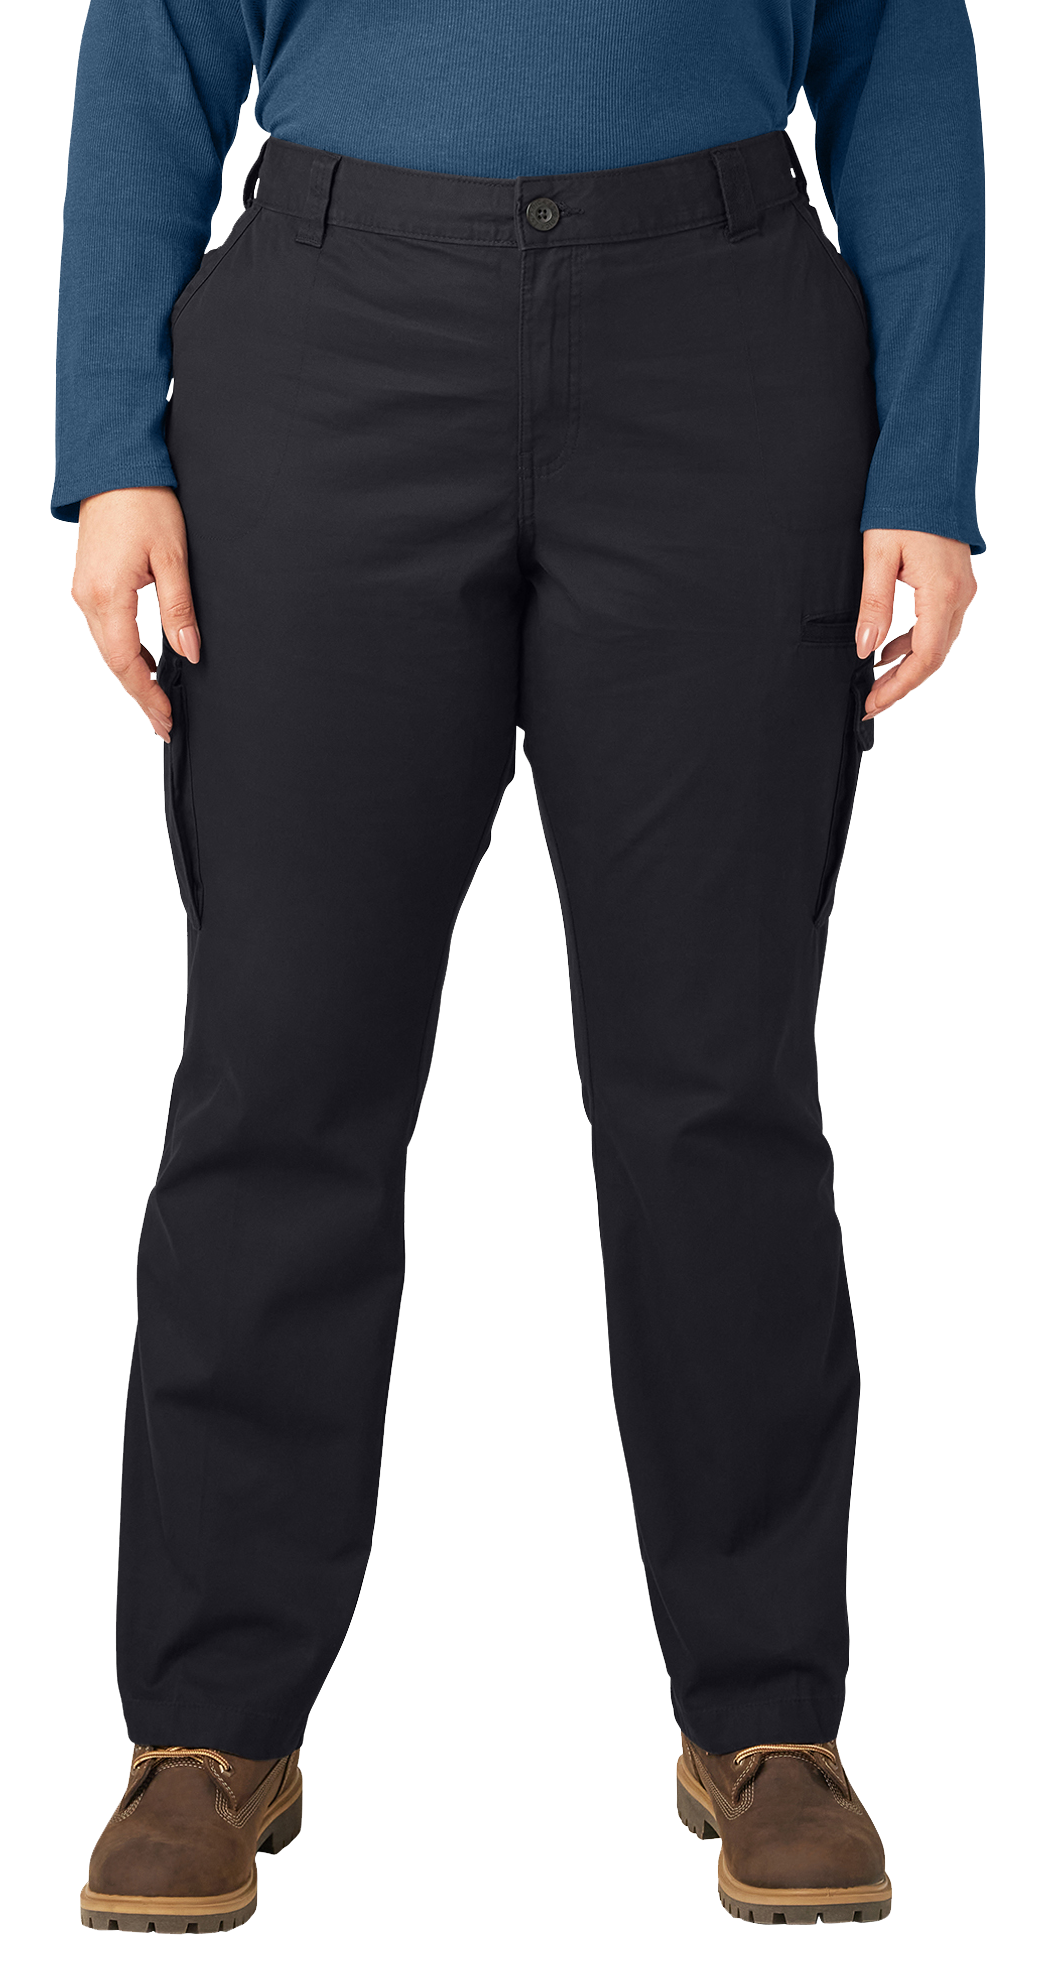 Natural Reflections Stretch Twill Comfort Waist Cargo Pants for